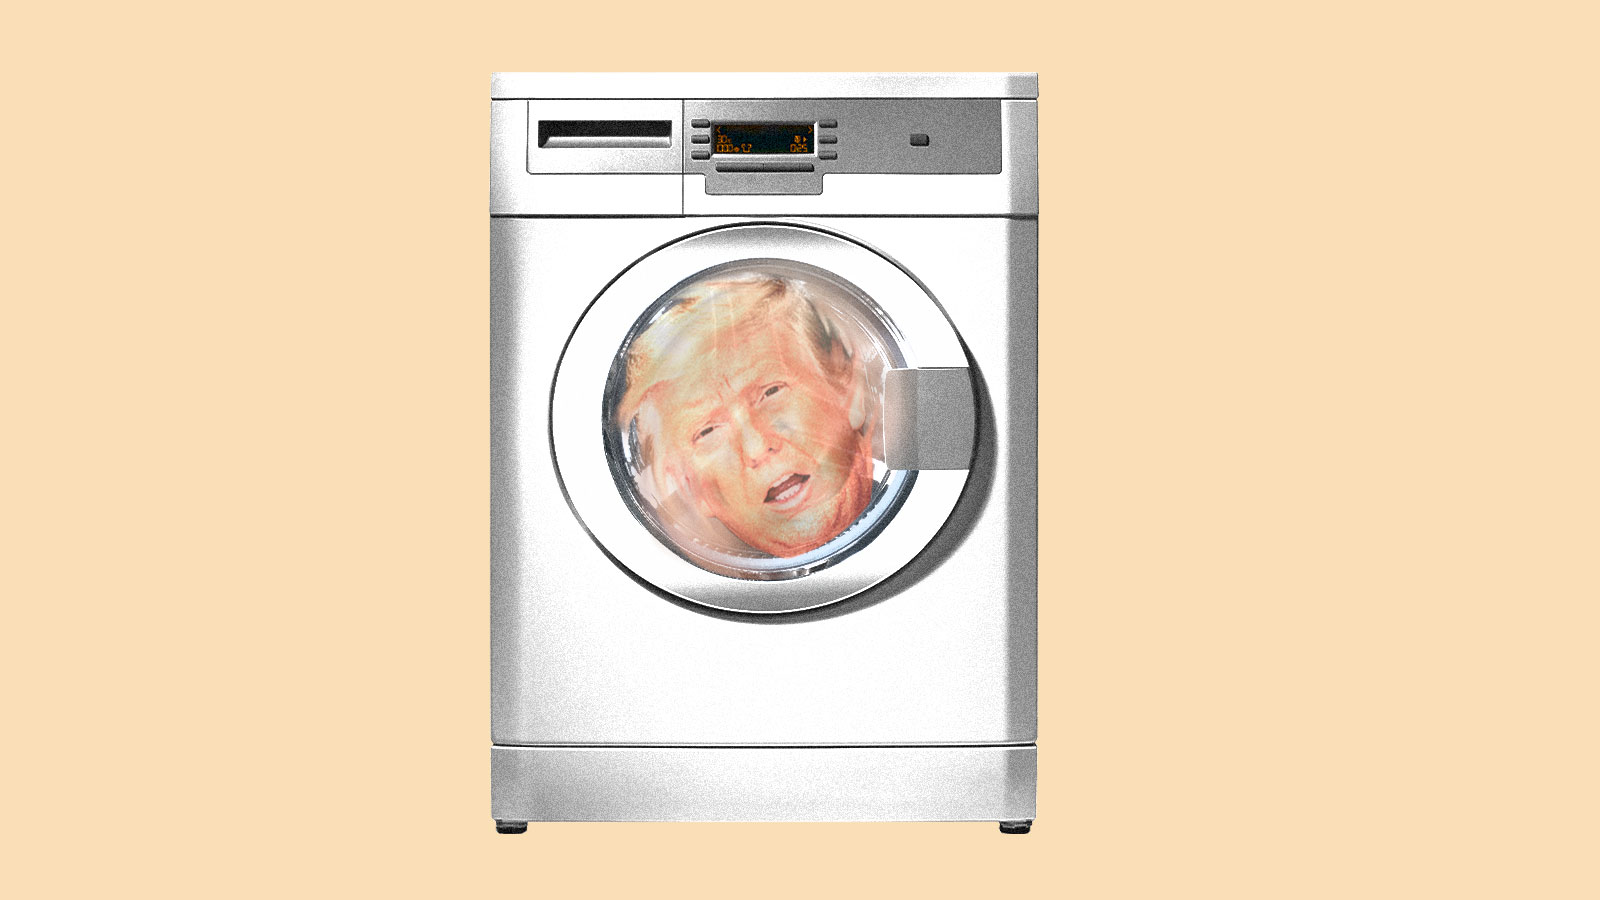 Donald Trump's head spinning in a washing machine